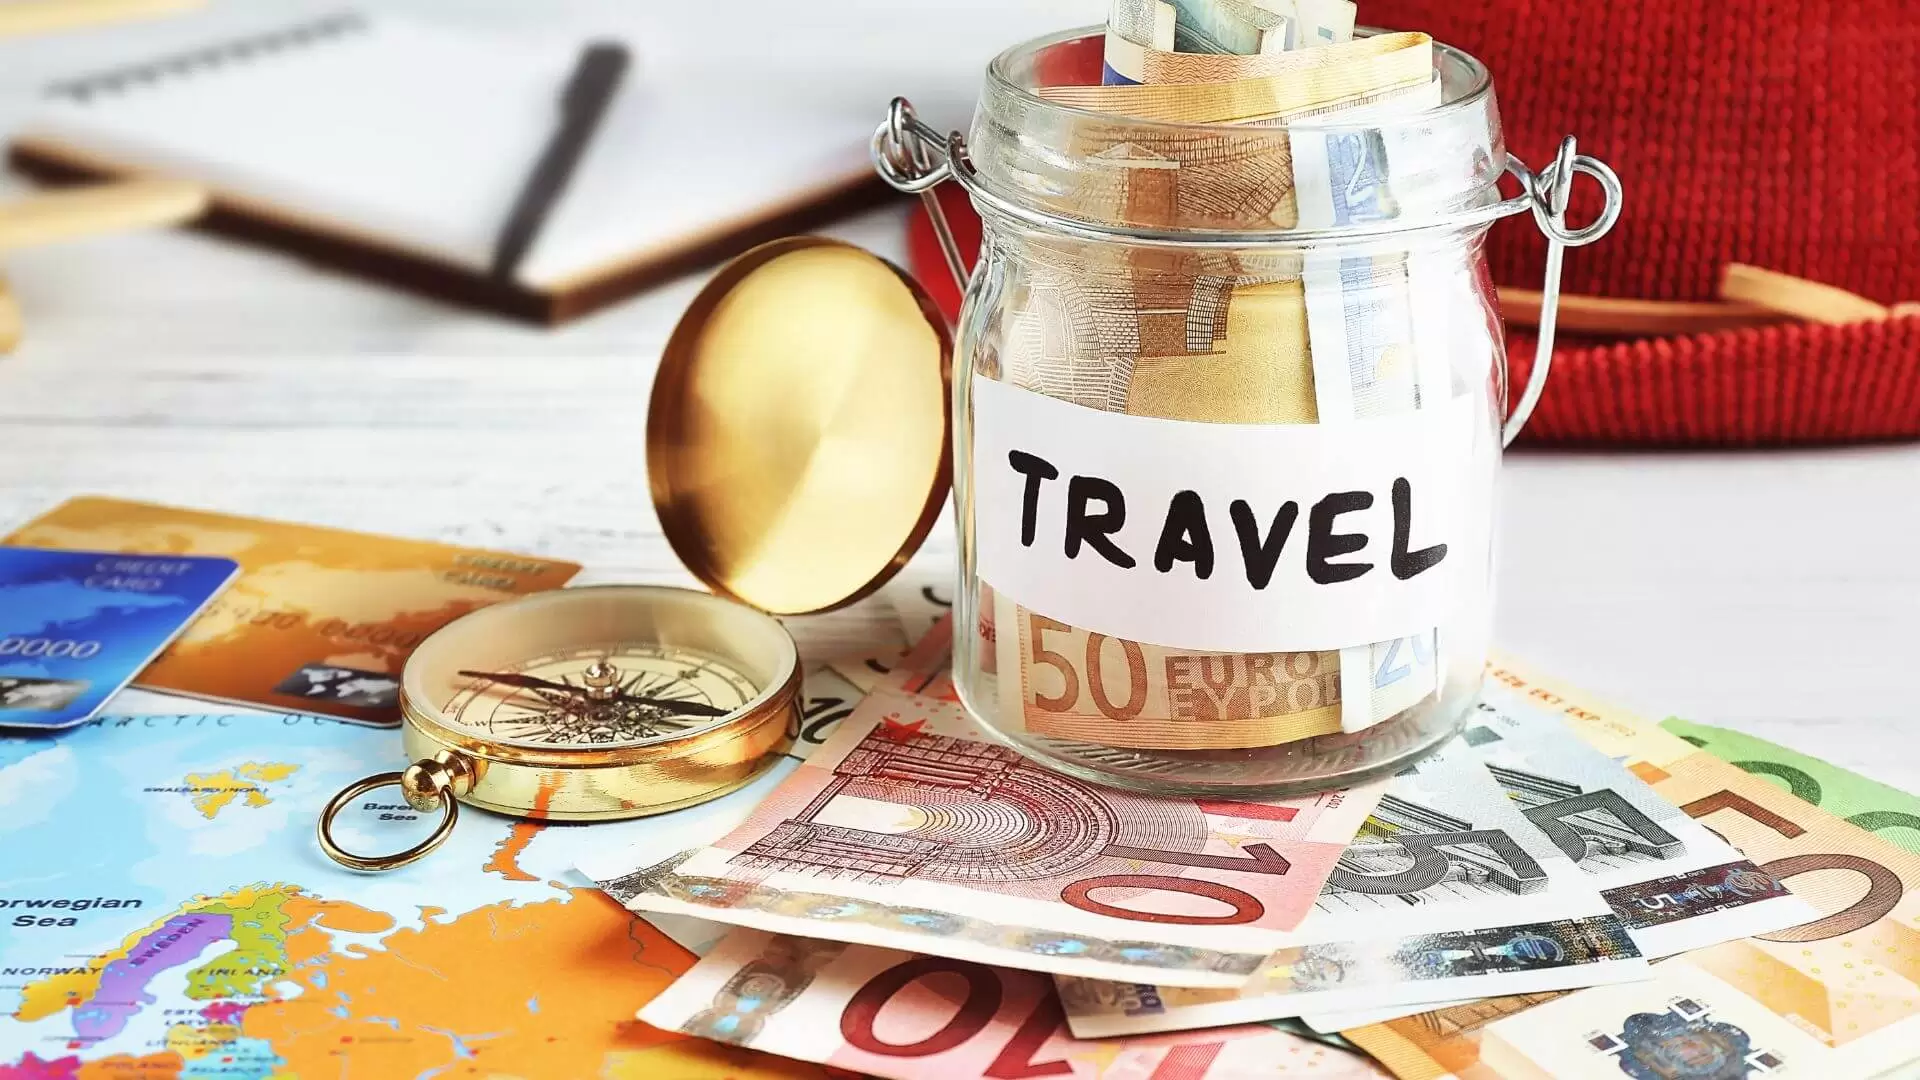 NOTE TO THE TOURIST HOW TO SAVE MONEY ON A TRIP (1)